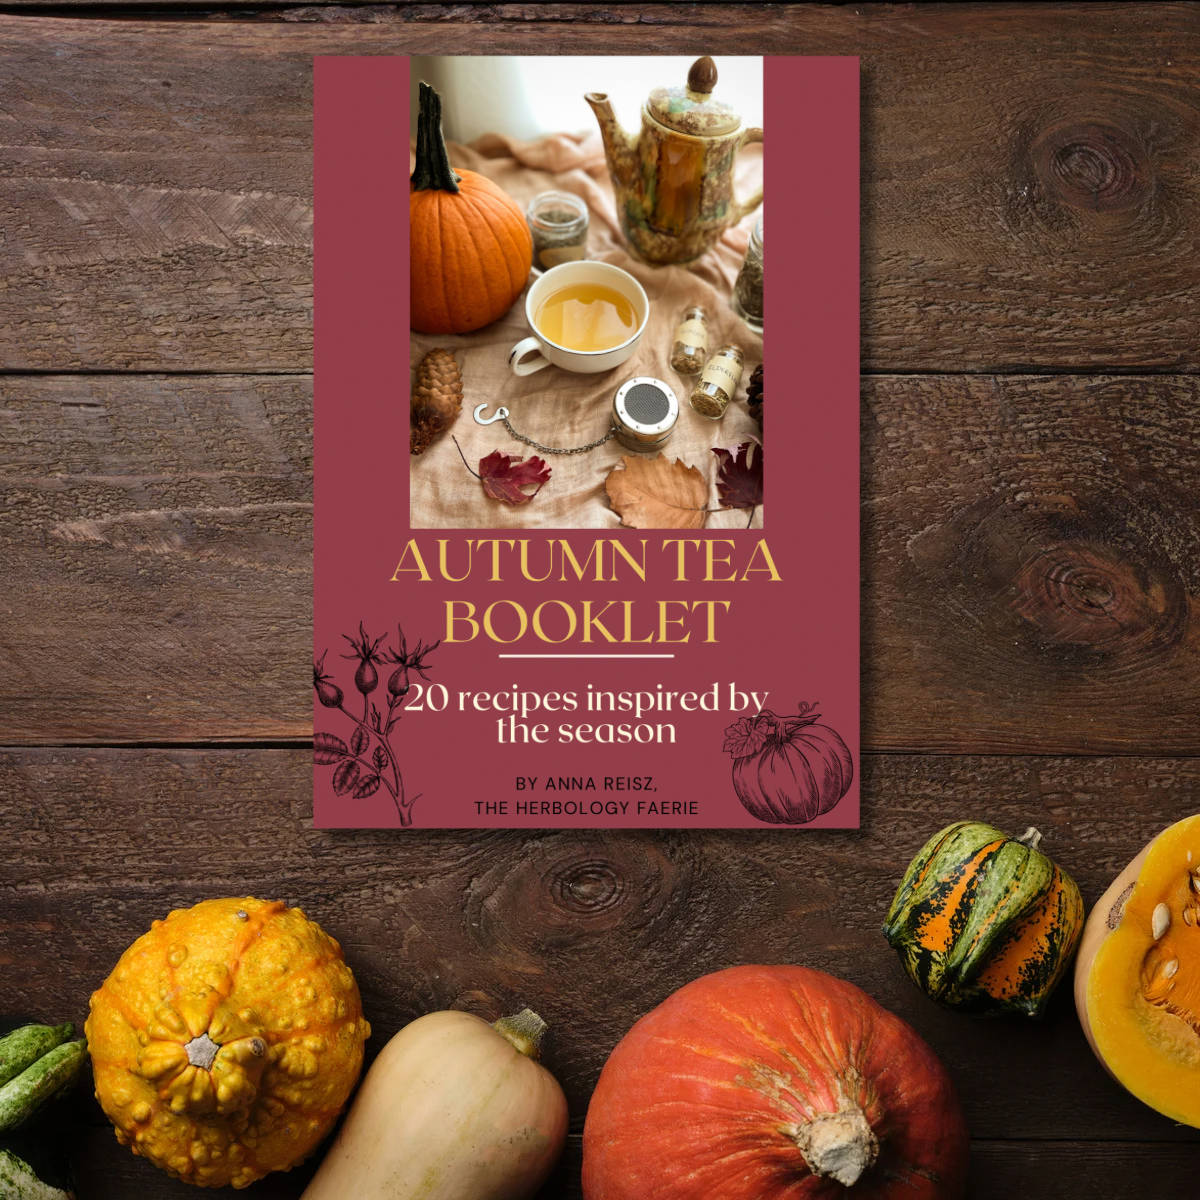 Autumn Tea Recipe Booklet by The Herbology Faerie